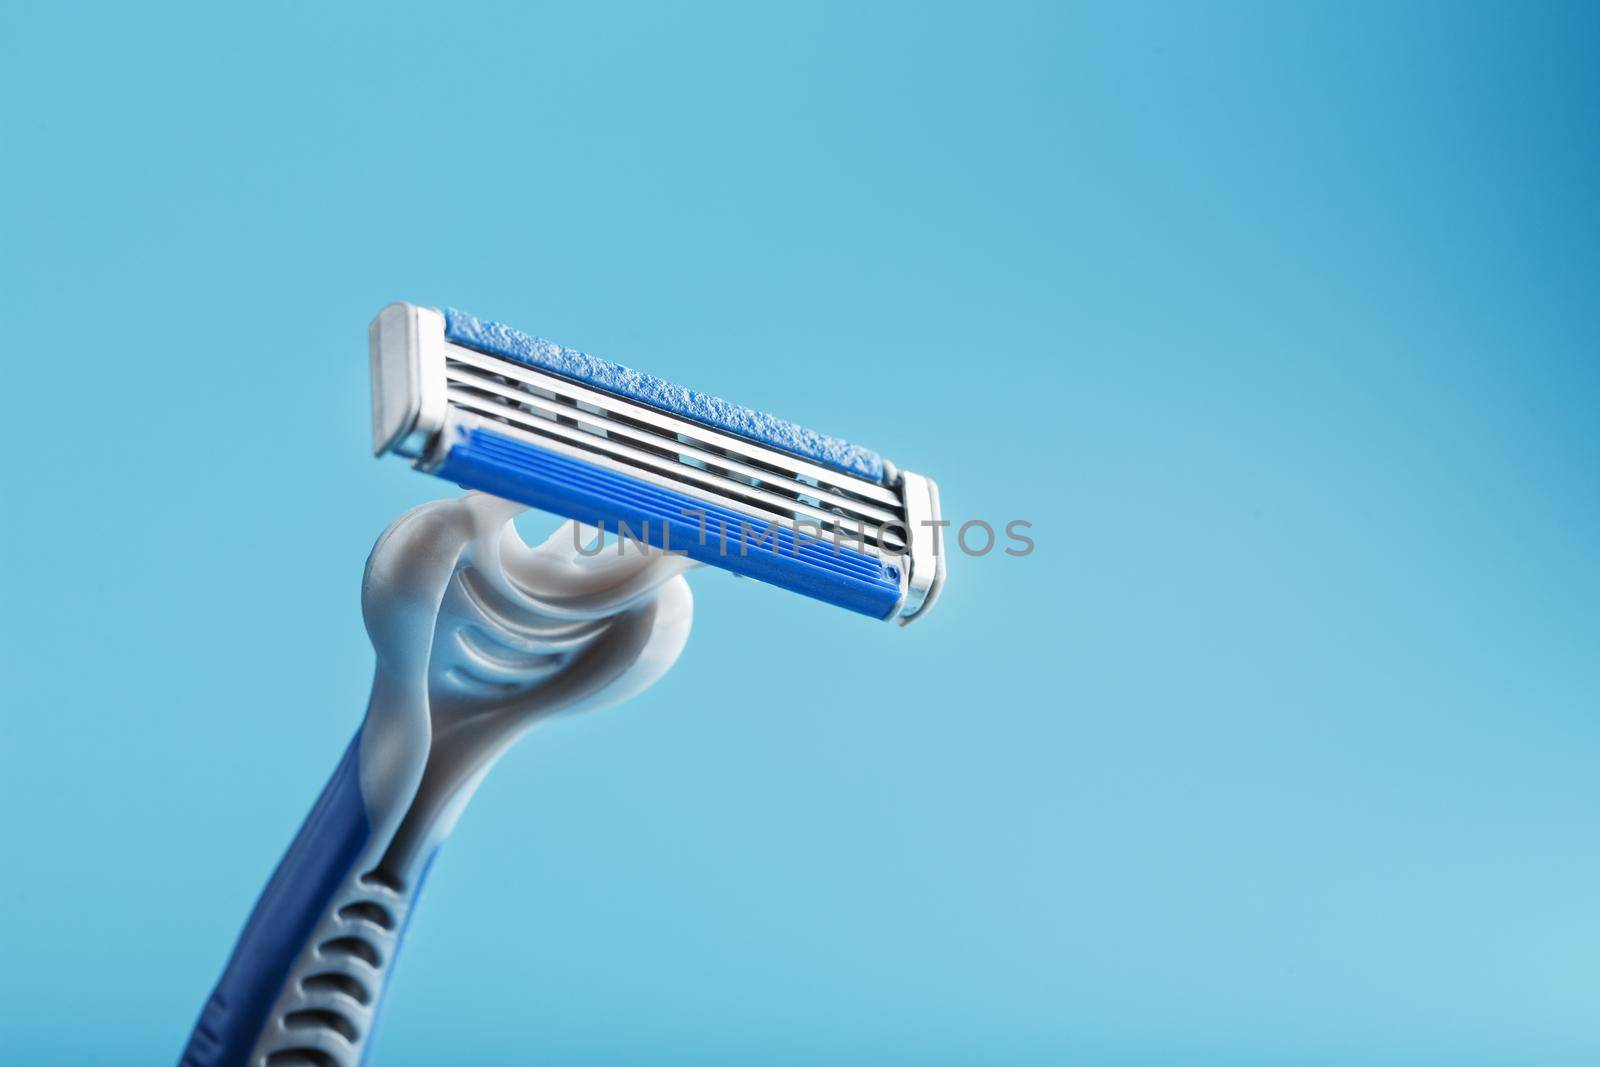 Shaving machine with three blades on a blue background close-up free space